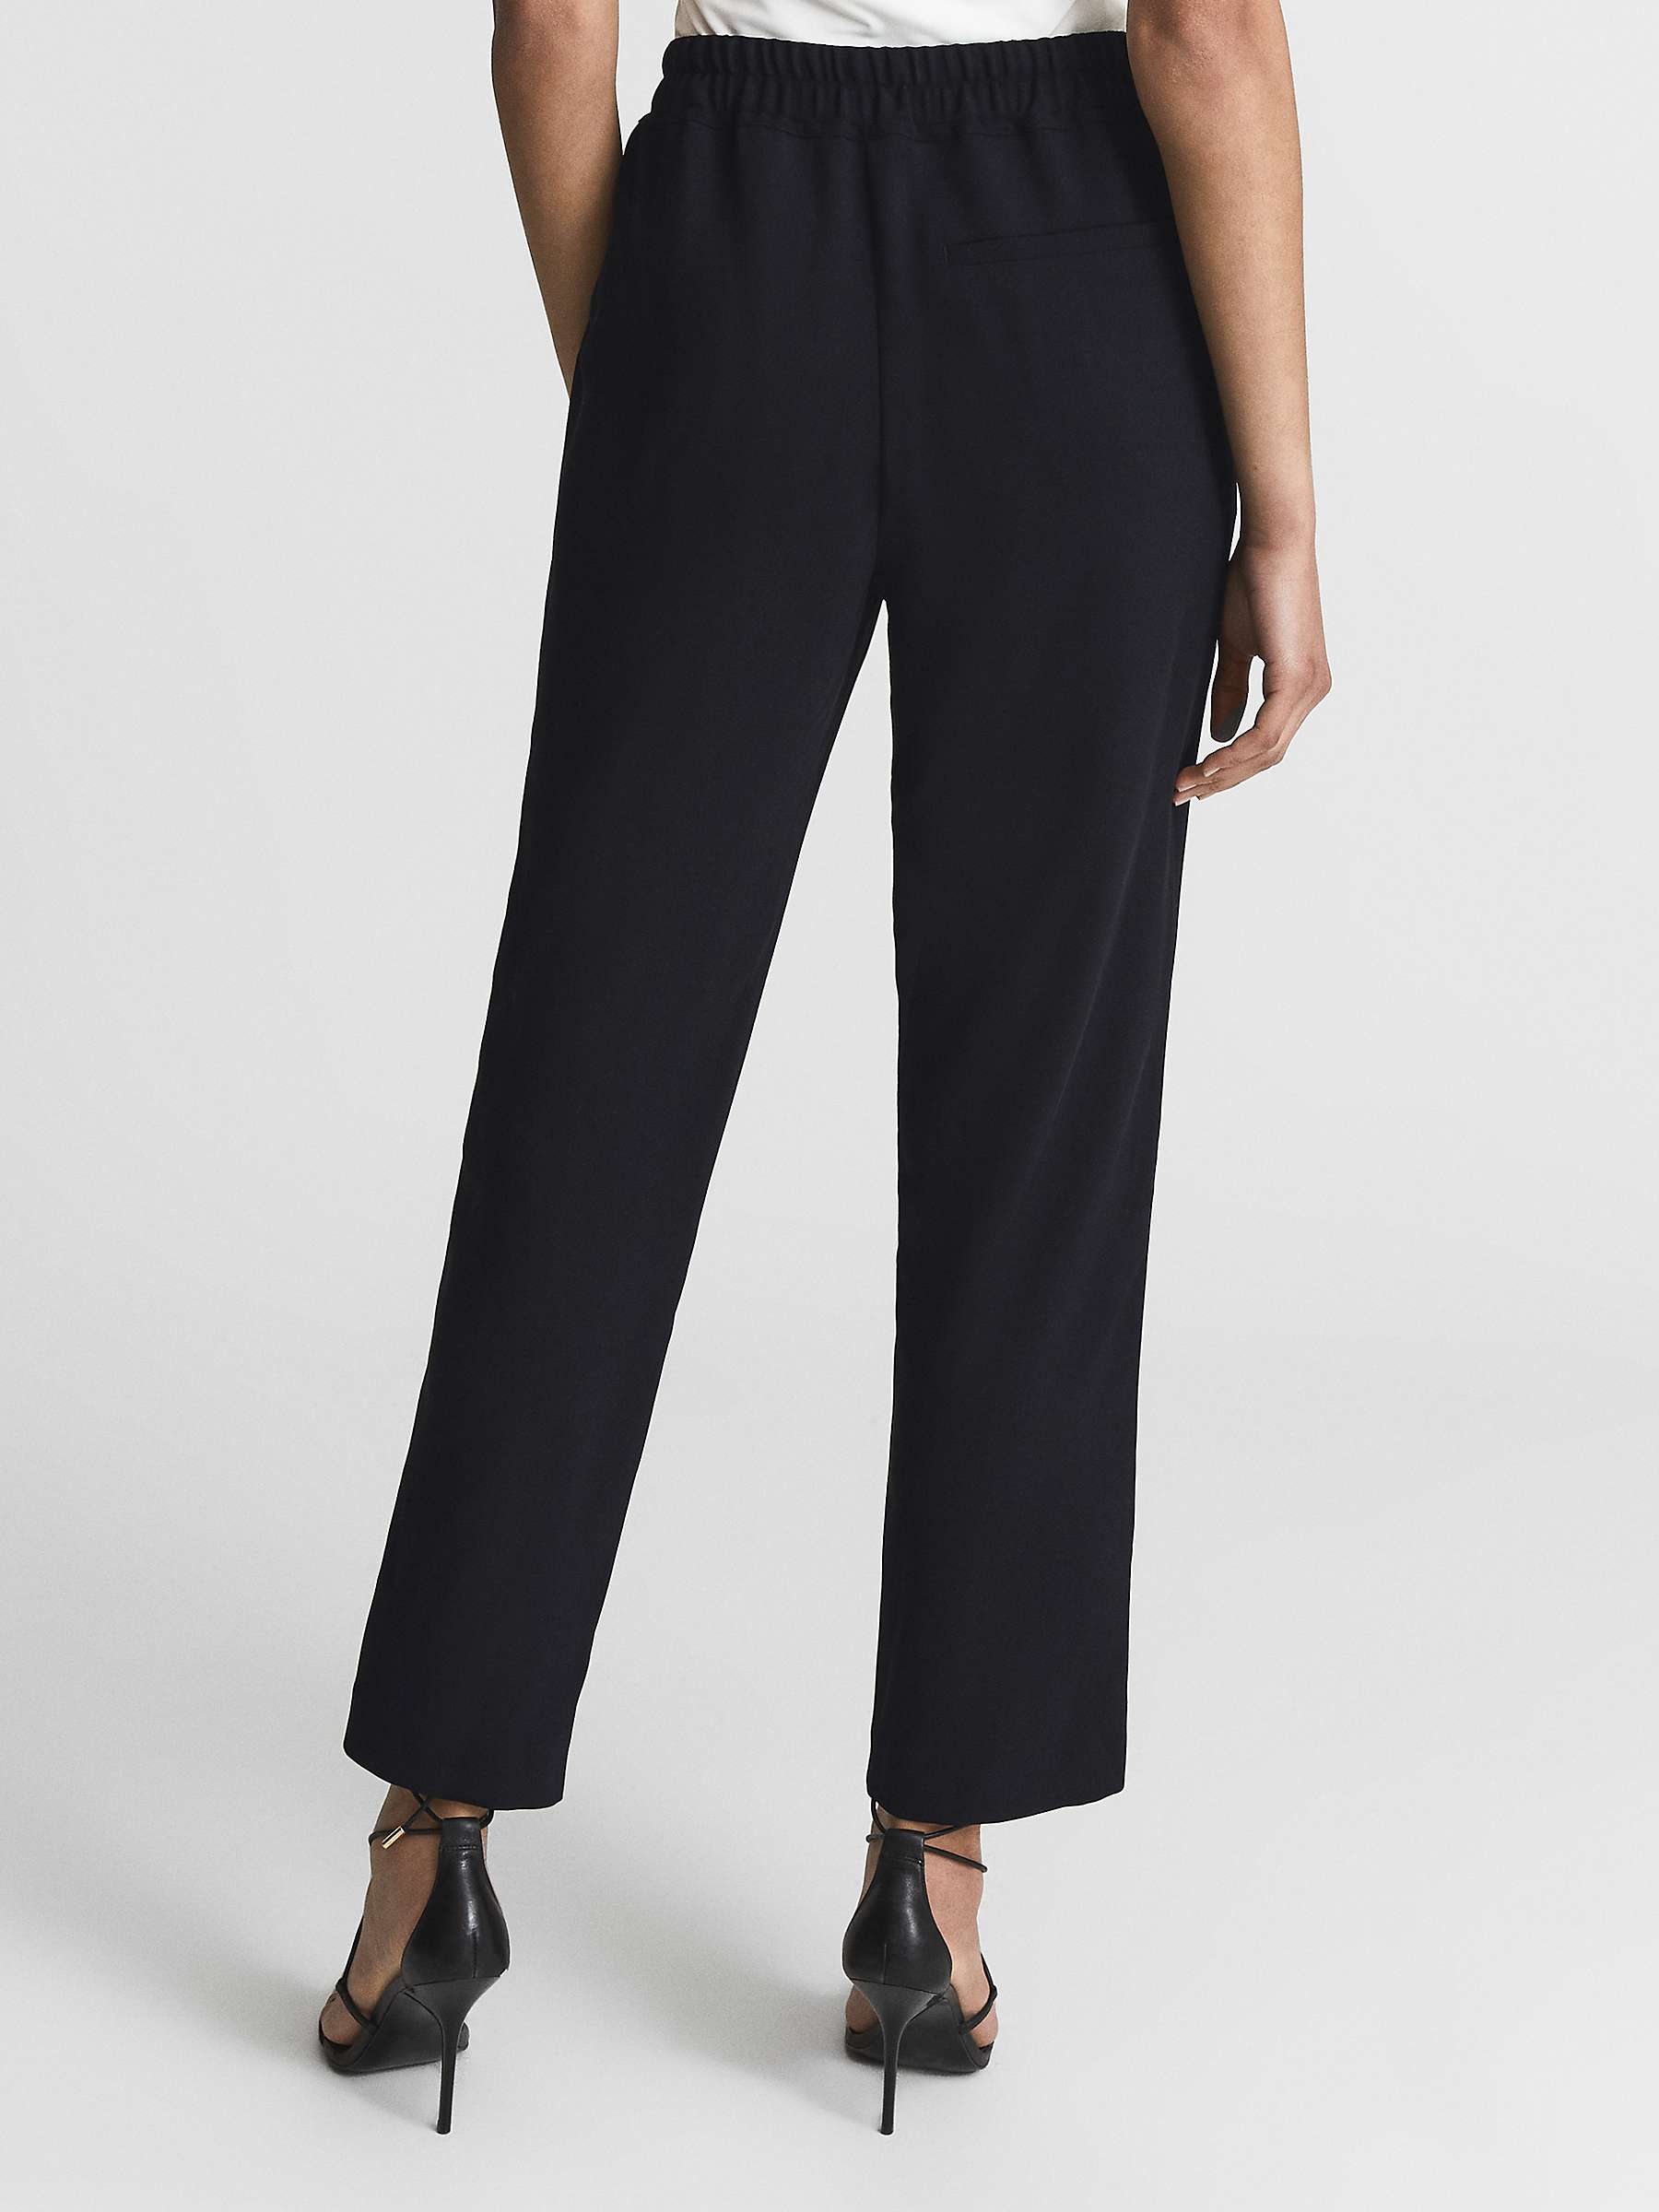 Buy Reiss Hailey Cropped Trousers, Jet Black Online at johnlewis.com